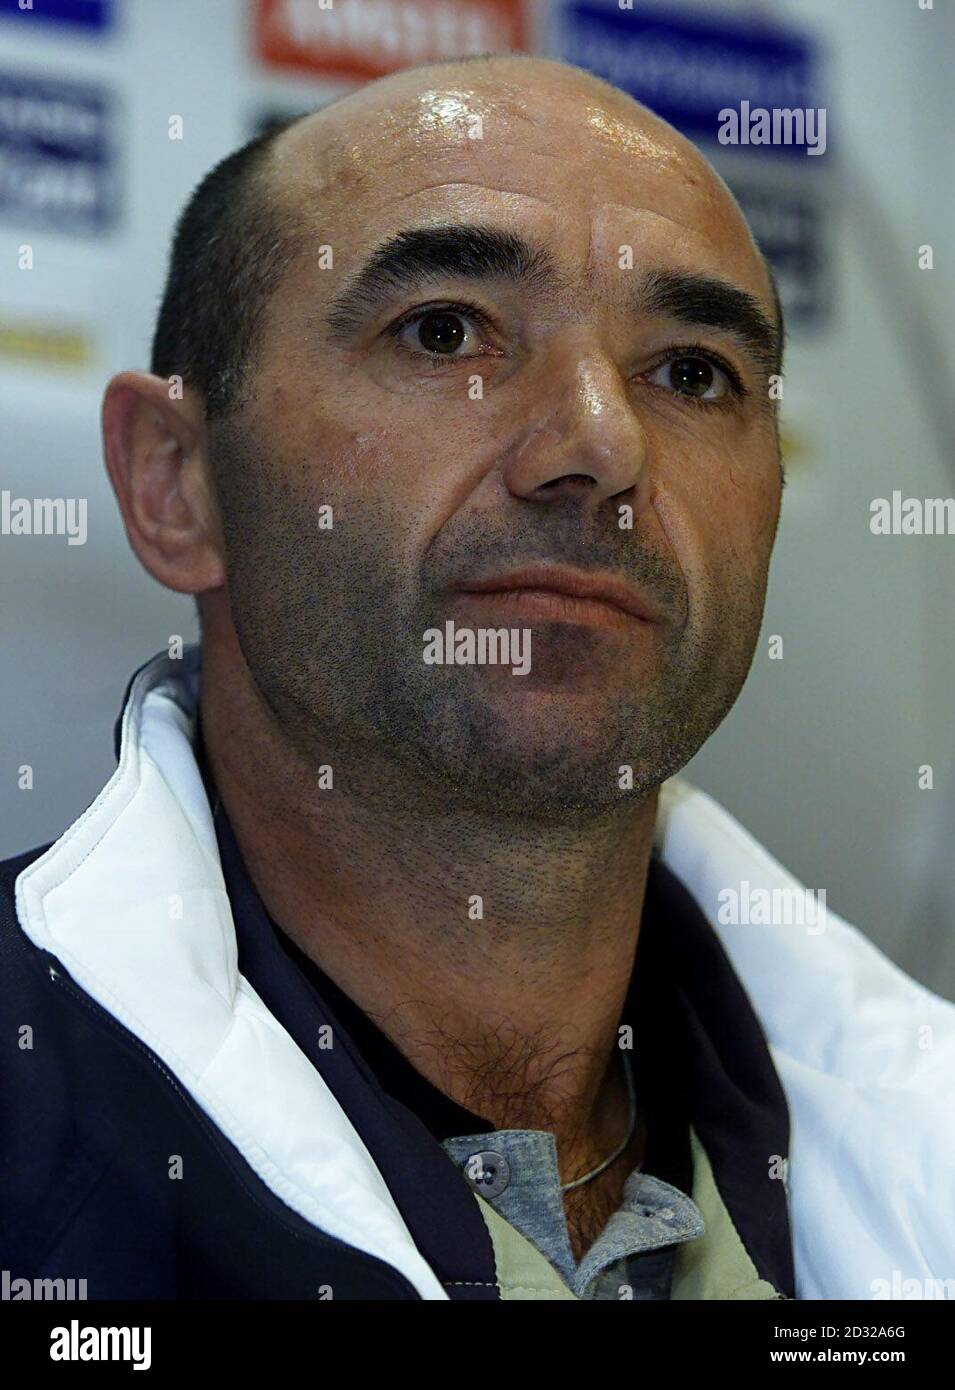 Boavista coach Jaime Pacheco speaking at a press conference before the 2nd phase, group 2, Champions League match against Man Utd at Old Trafford. Stock Photo